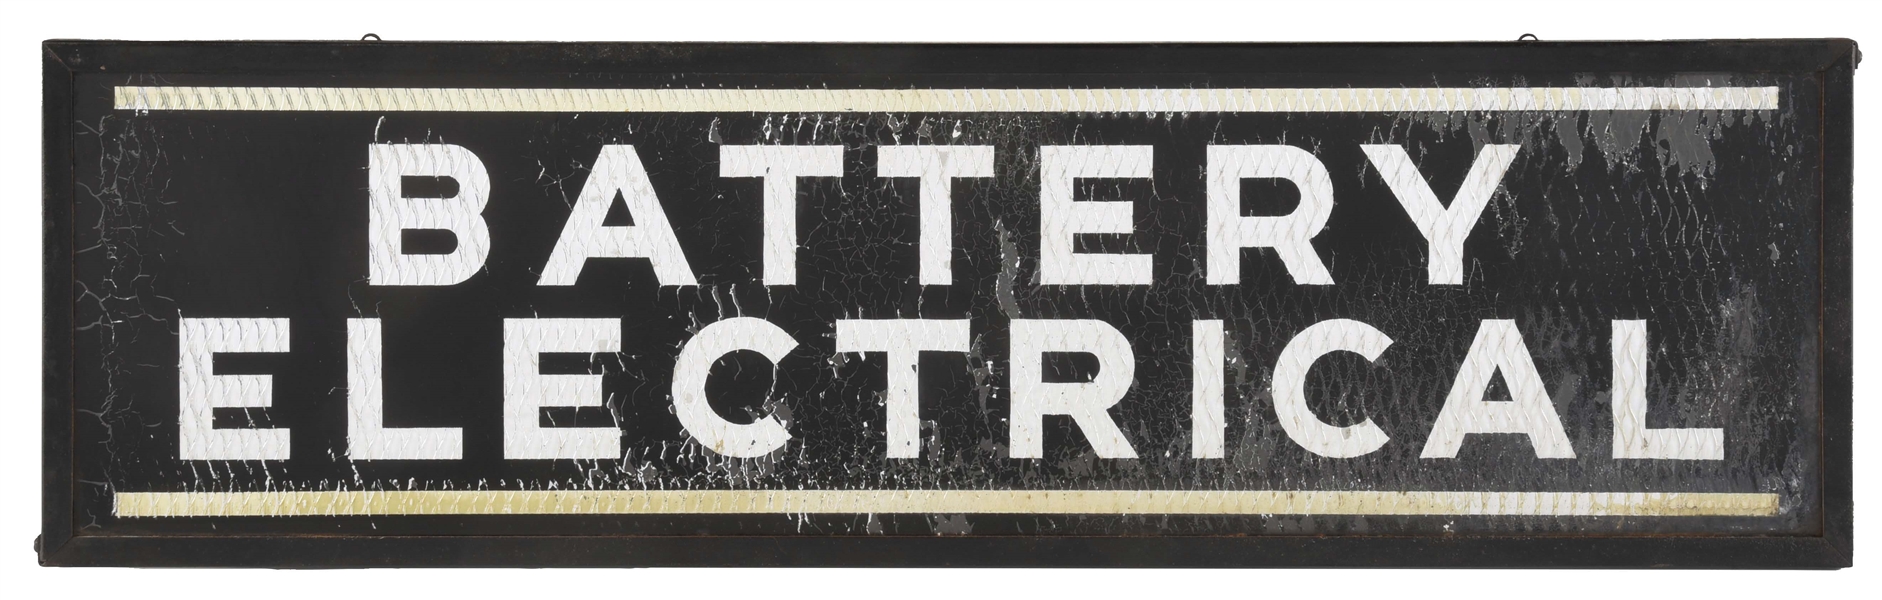 BATTERY & ELECTRICAL REFLECTIVE GLASS AUTOMOTIVE REPAIR SIGN W/ METAL FRAME. 